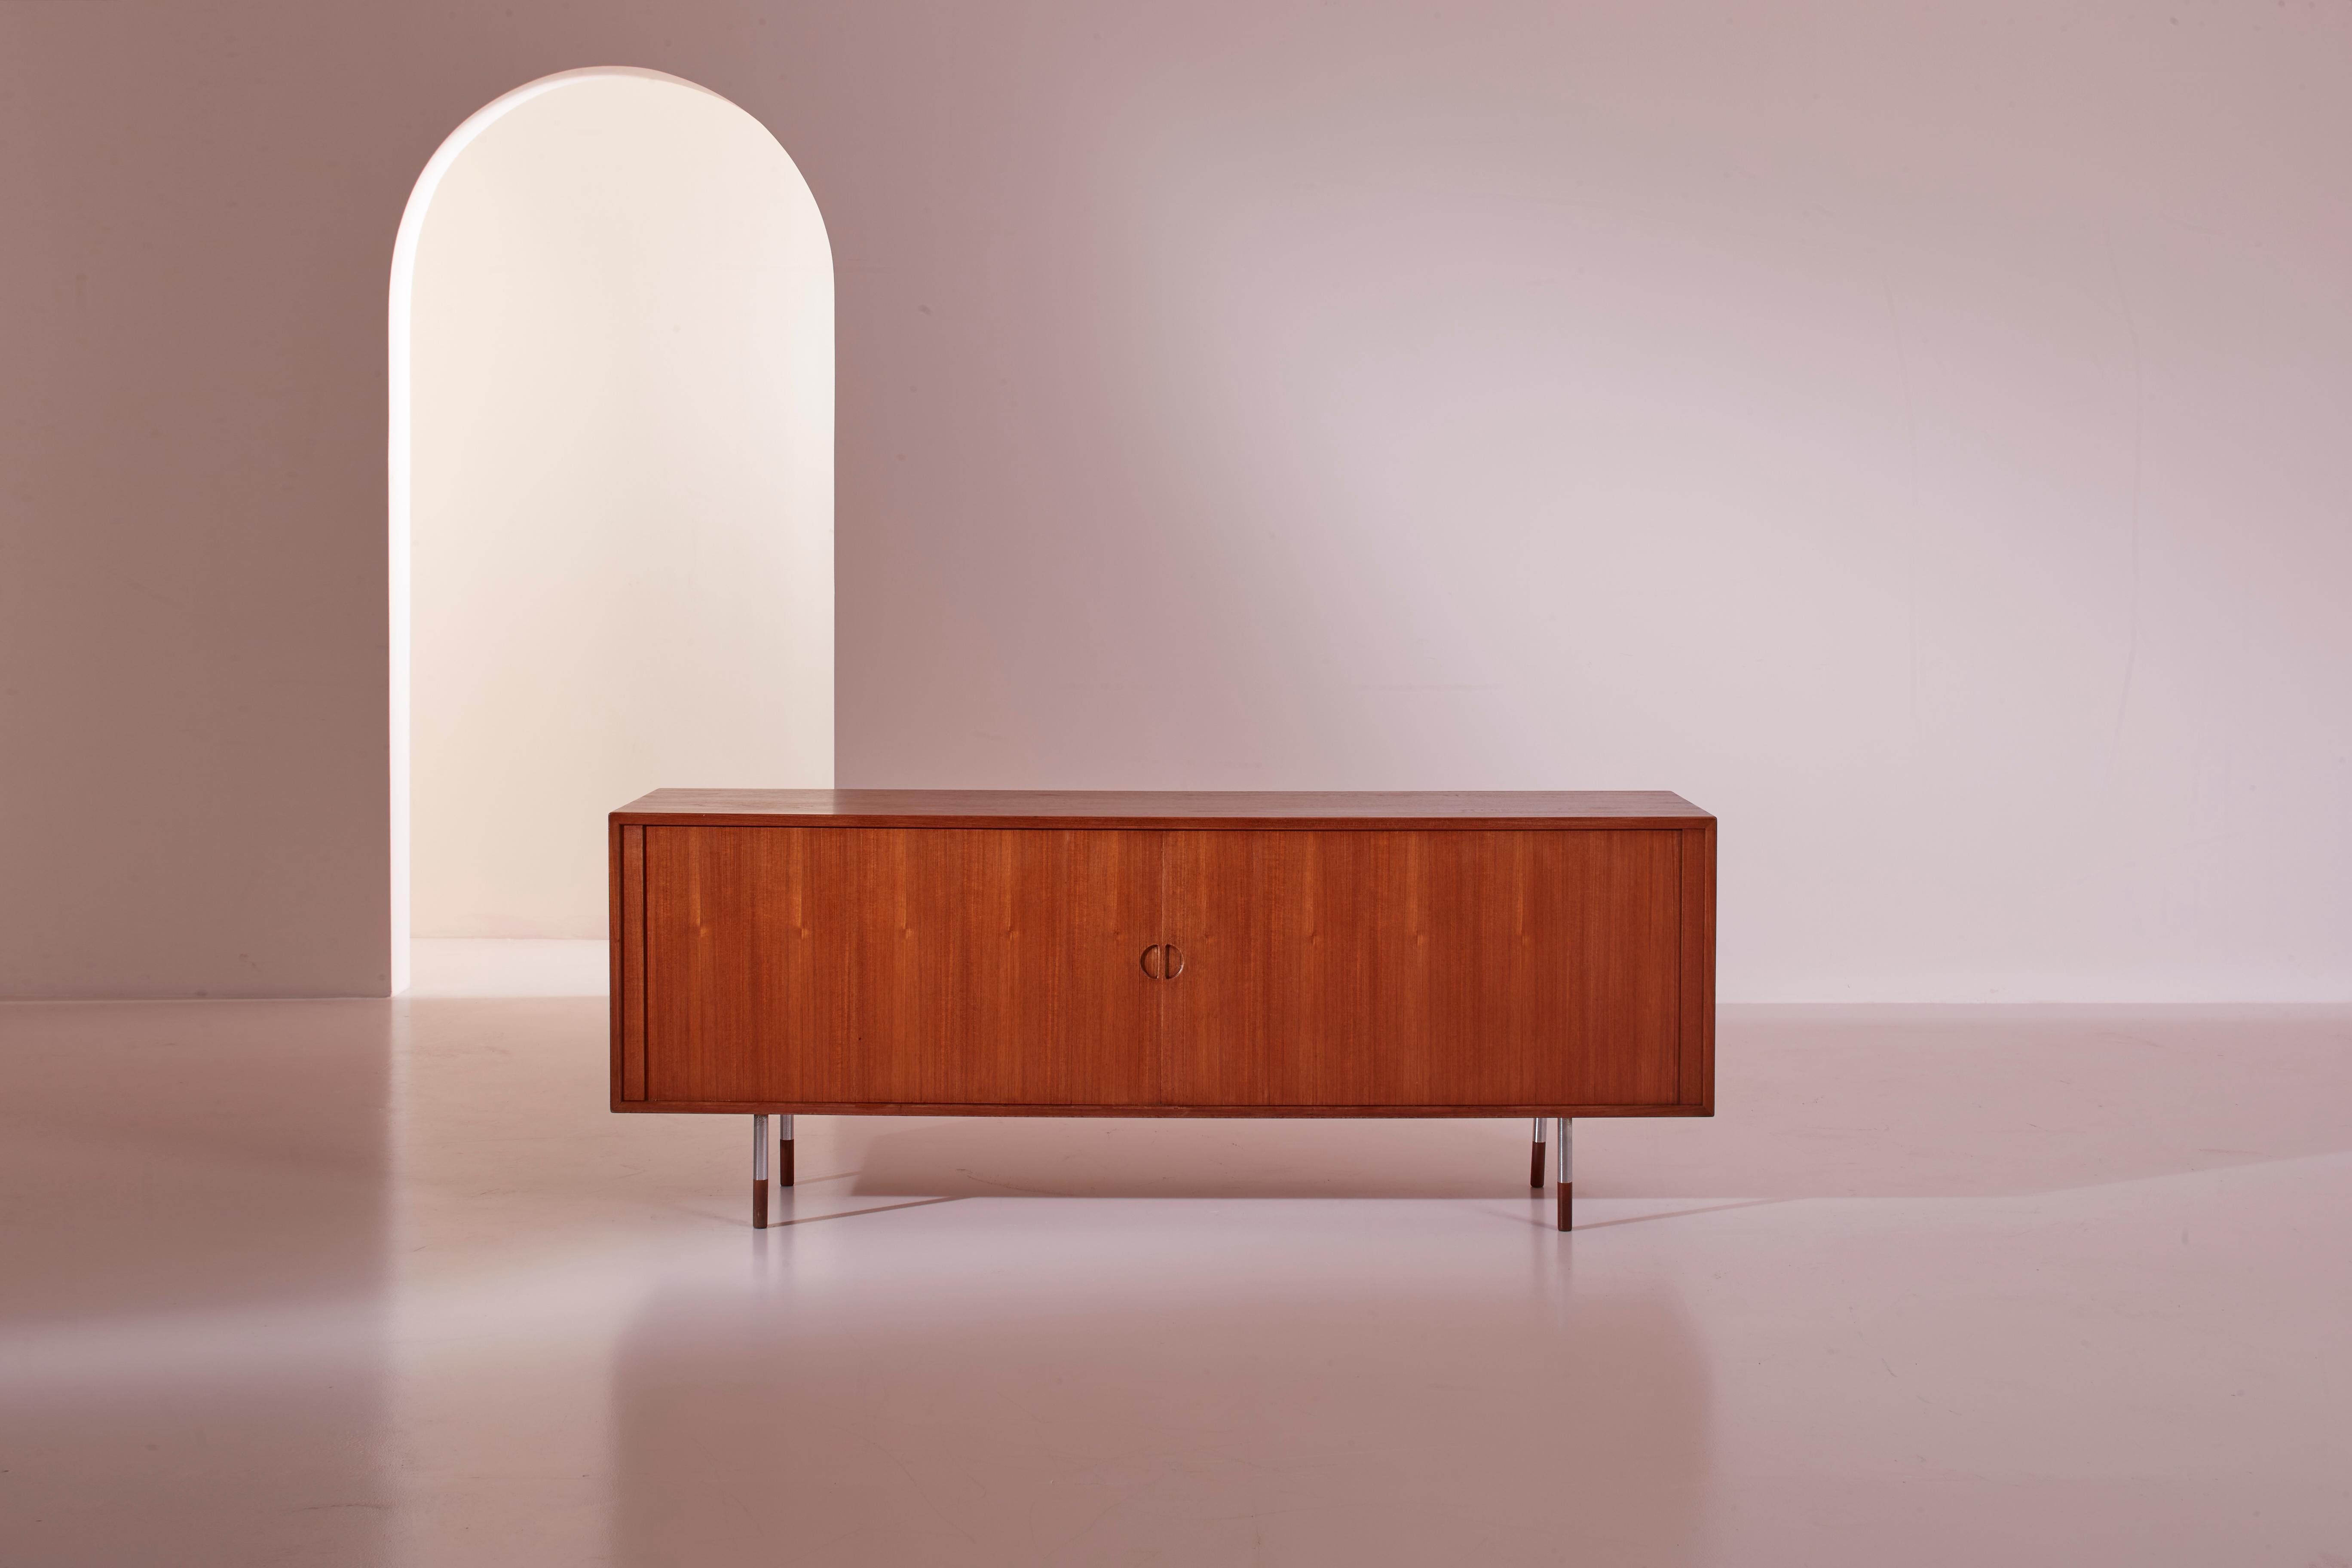 A well-proportioned sideboard crafted in teak and metal, dating back to the 1950s, bears the signature of the renowned designer Arne Vodder for Sibast Furniture, Denmark.

This elegant piece of furniture fully embodies the principles of simplicity